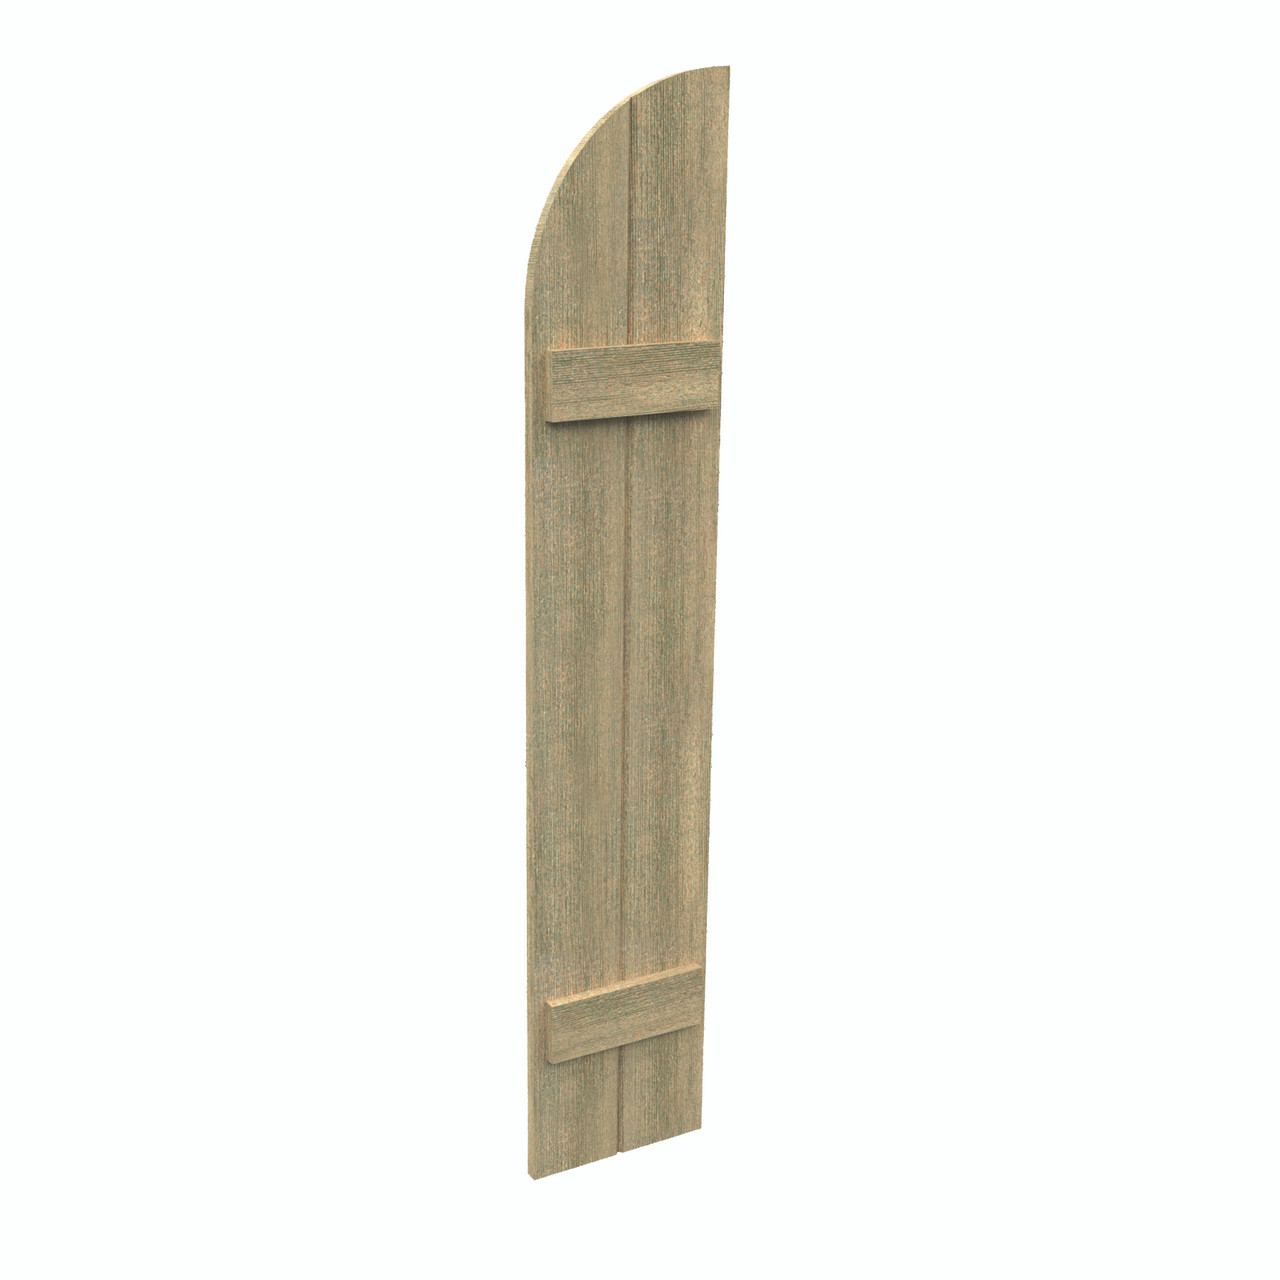 12 inch by 115 inch Quarter Round Shutter with 2-Boards